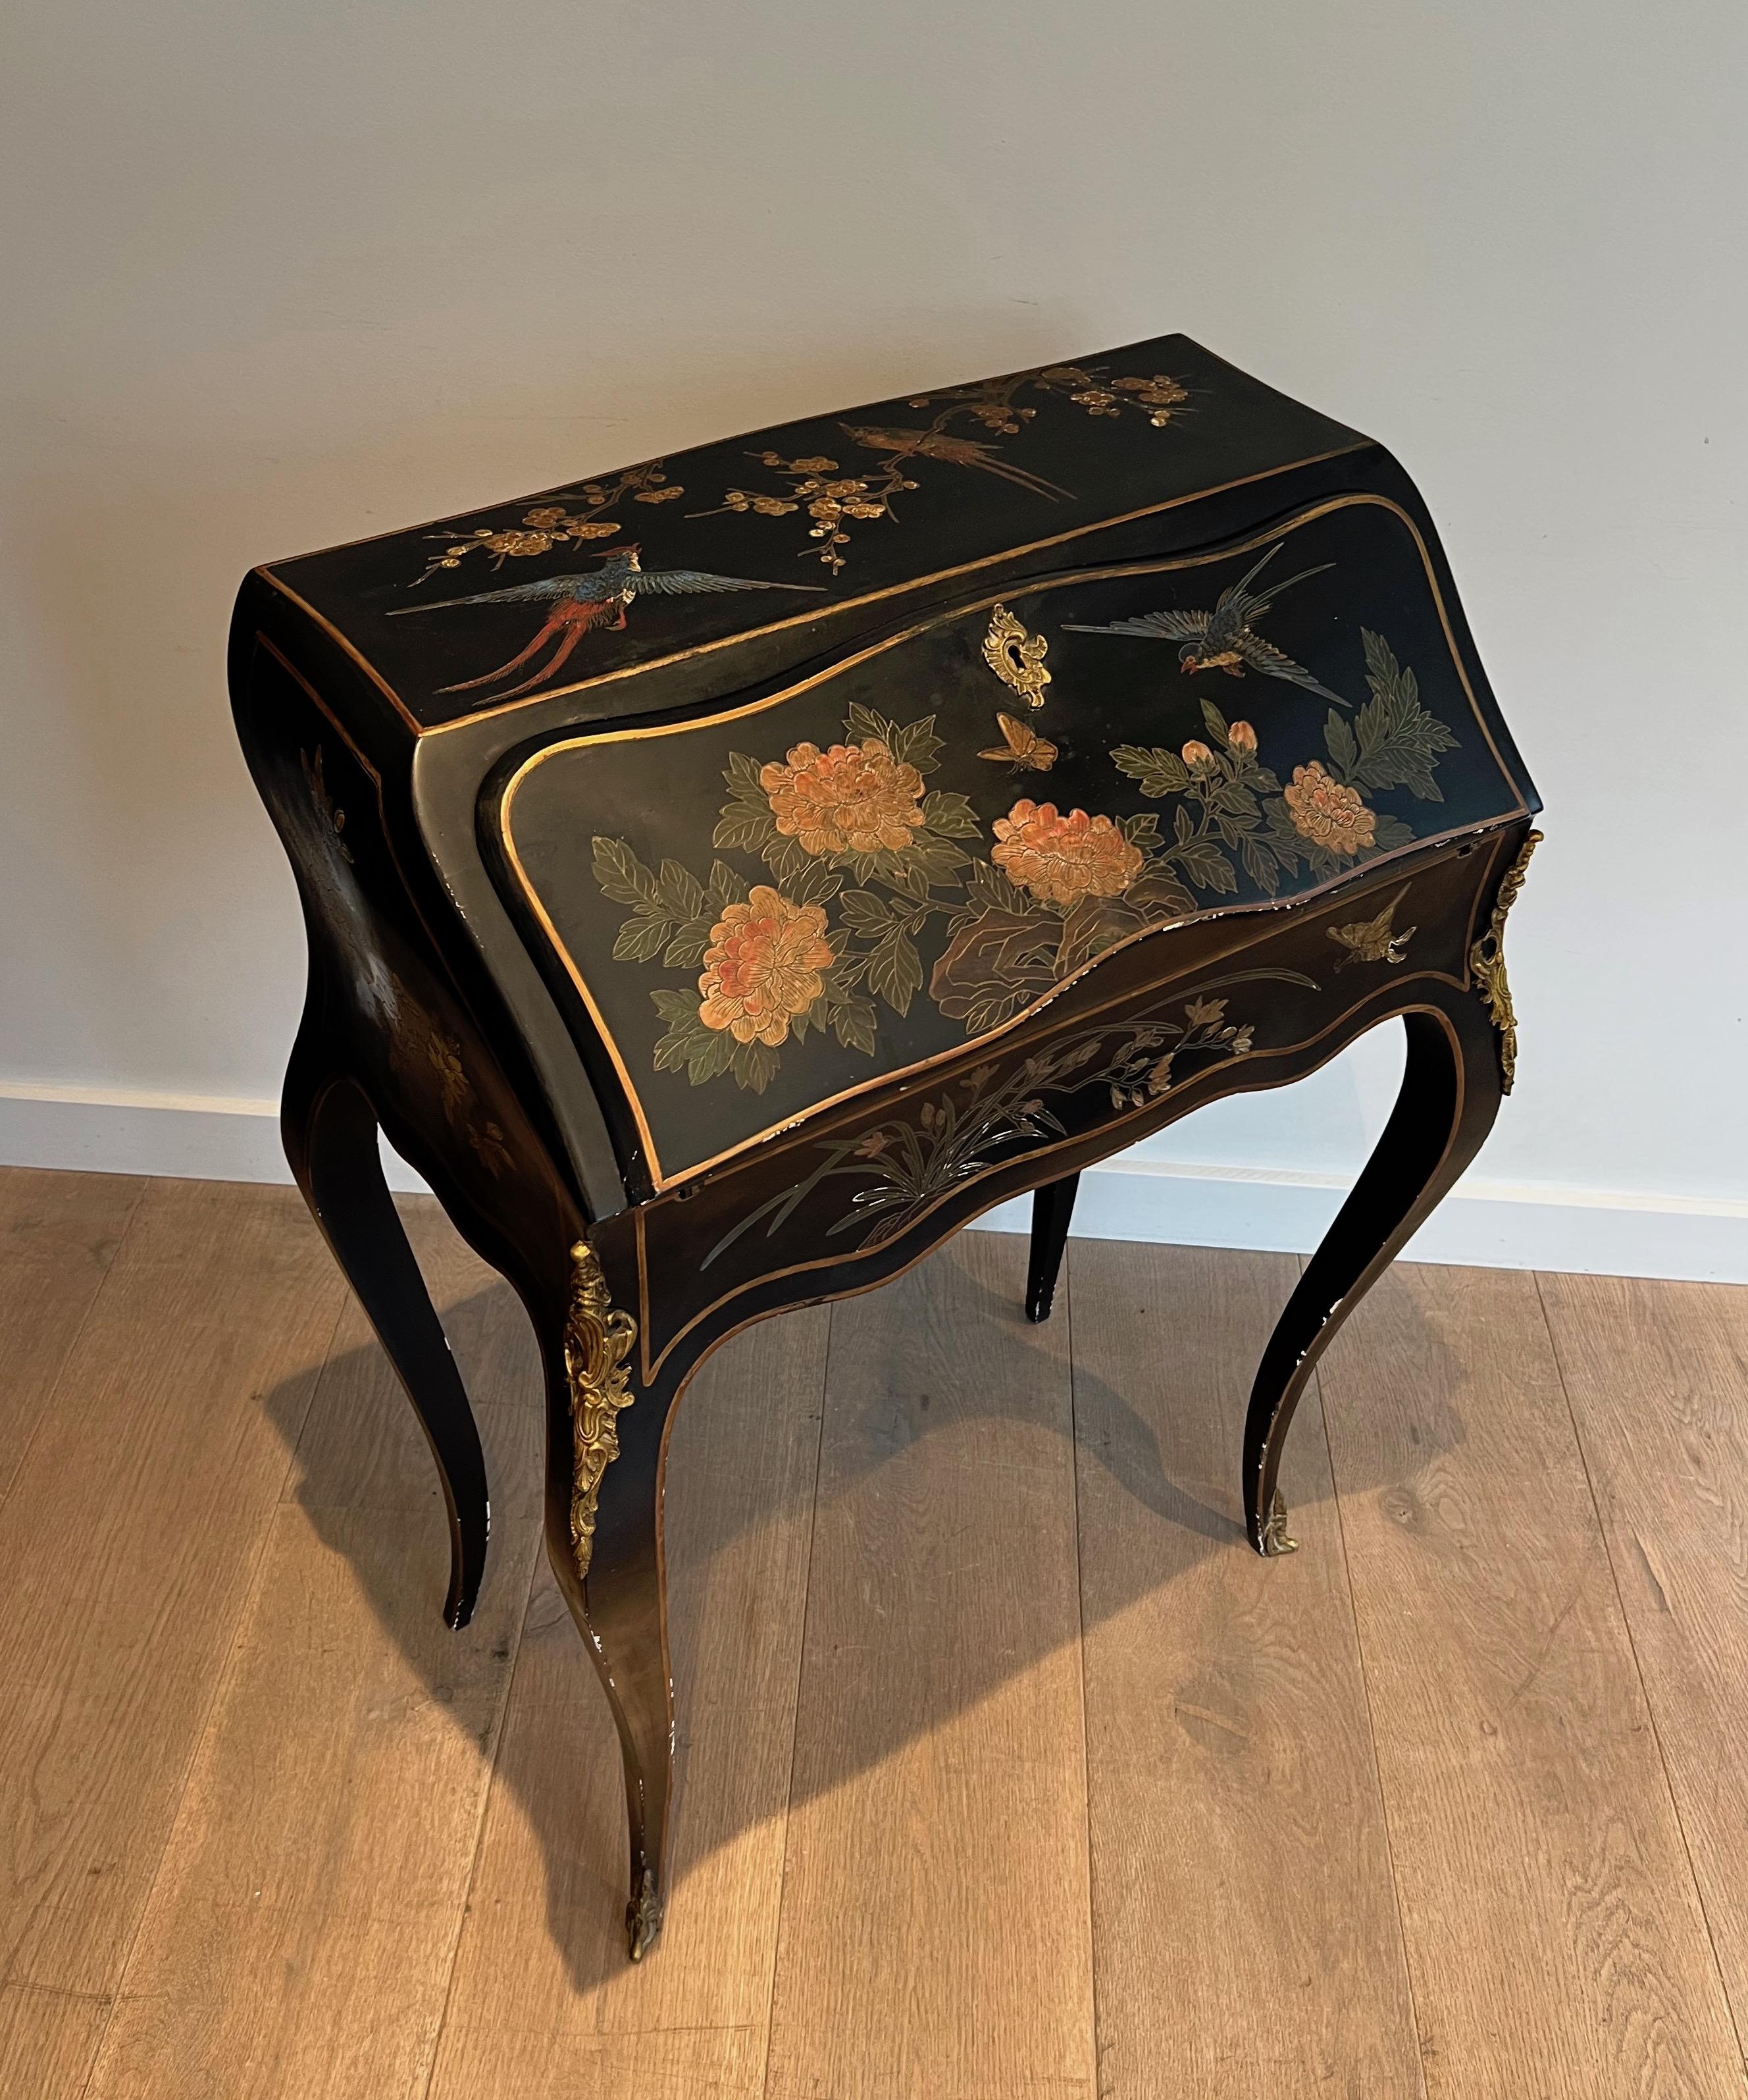 This very nice and decorative secretaire is made of lacquered wood with Chinese decorations, birds, flowers. This is a French work in the style of Maison Jansen, circa 1940.